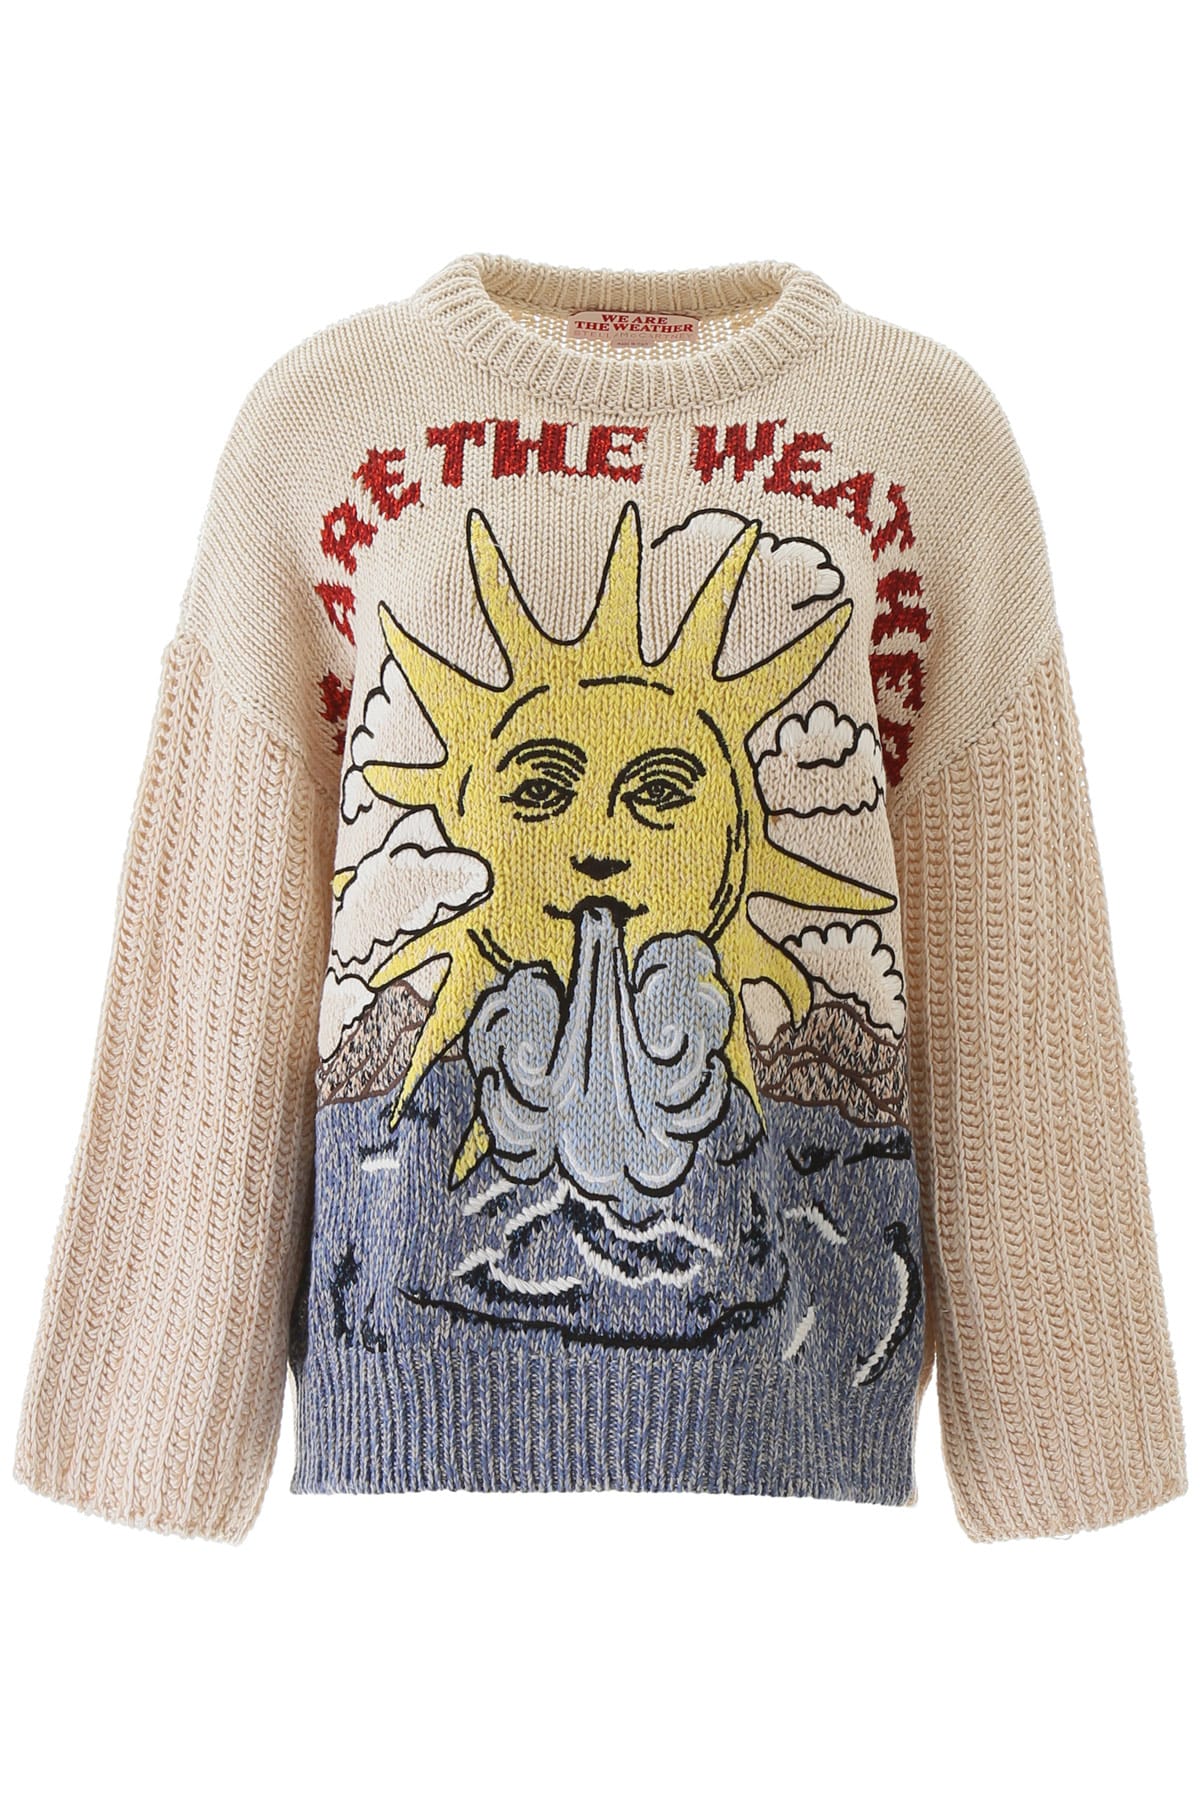 STELLA MCCARTNEY WE ARE THE WEATHER SWEATER,11275066